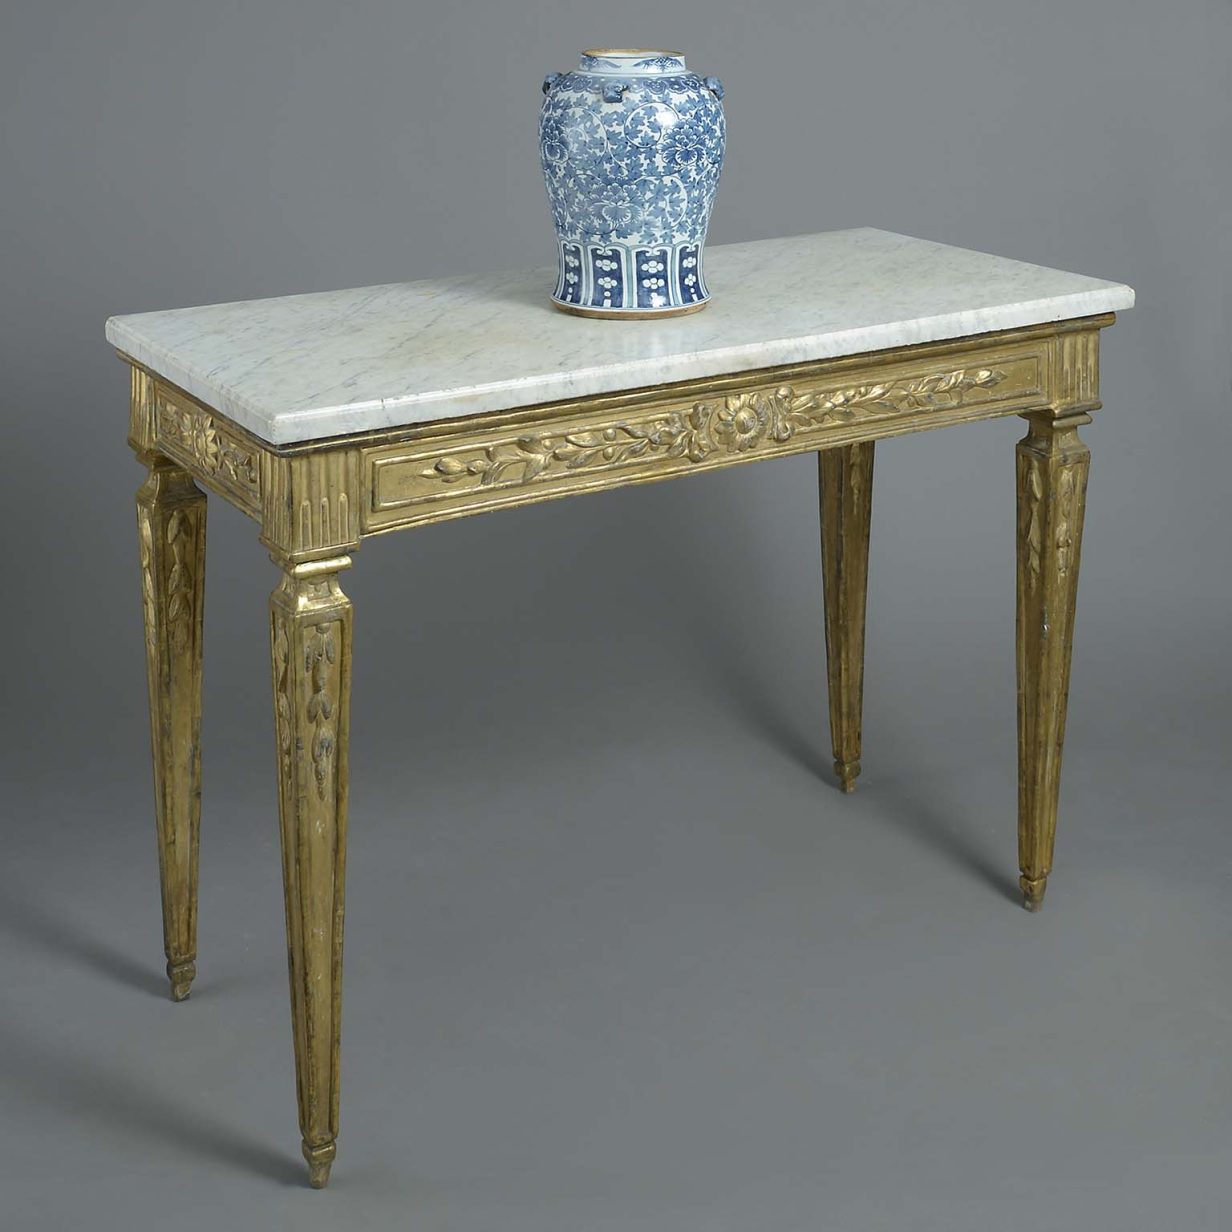 Late 18th century neo-classical giltwood console table